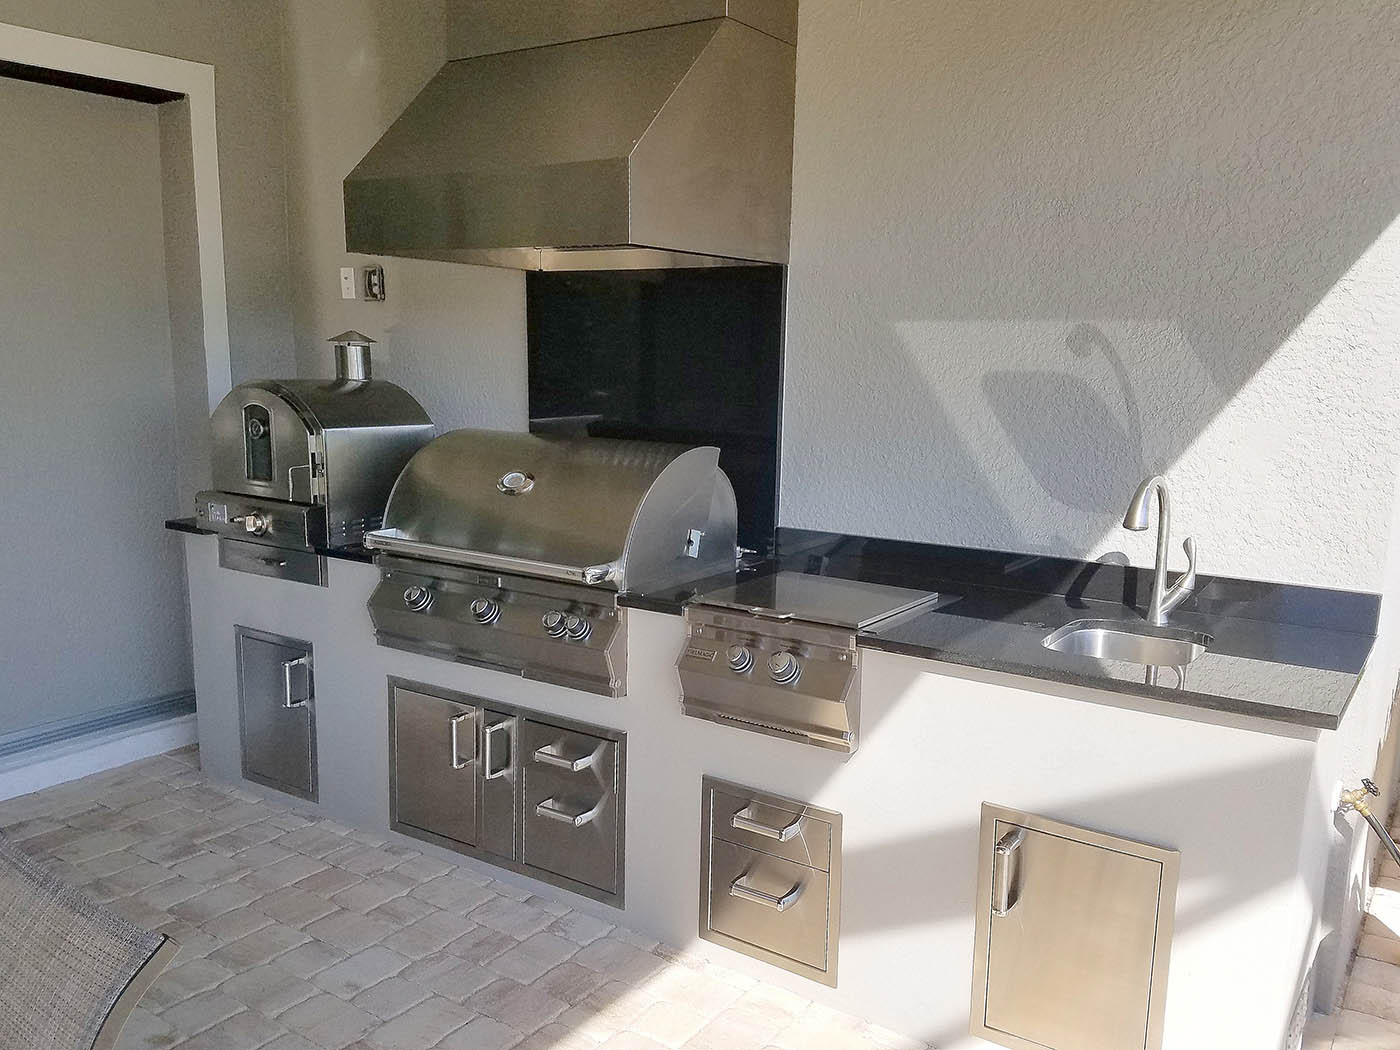 Elegant Outdoor Kitchens, How To Stucco A Outdoor Kitchen